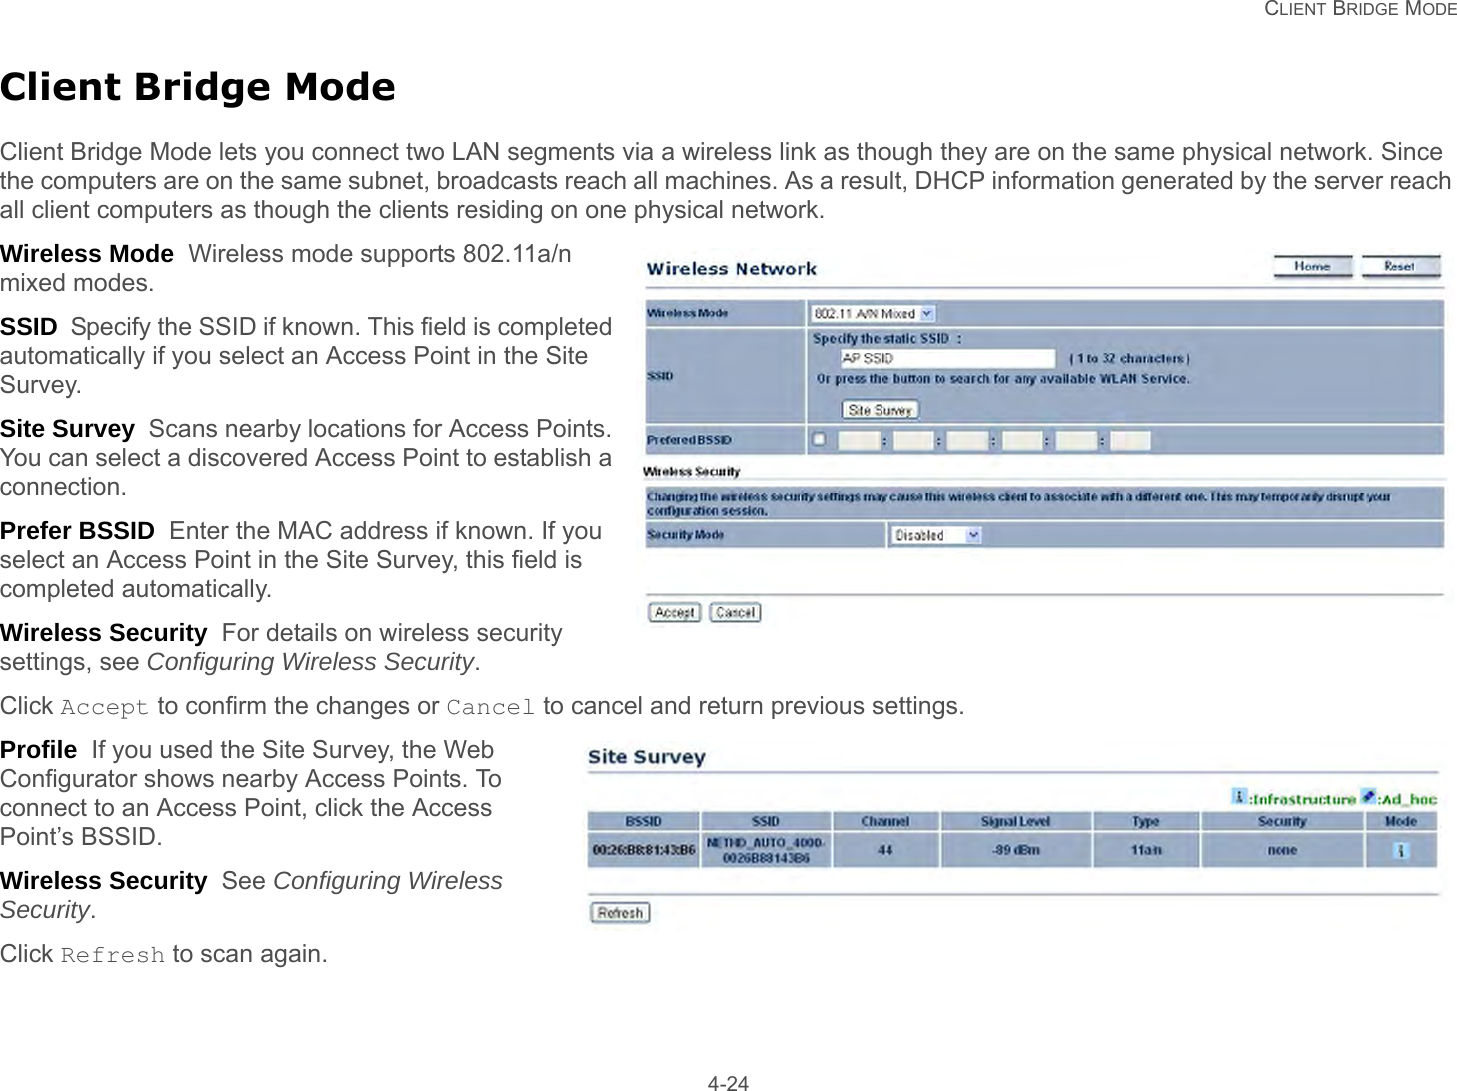   CLIENT BRIDGE MODE 4-24Client Bridge ModeClient Bridge Mode lets you connect two LAN segments via a wireless link as though they are on the same physical network. Since the computers are on the same subnet, broadcasts reach all machines. As a result, DHCP information generated by the server reach all client computers as though the clients residing on one physical network.Wireless Mode  Wireless mode supports 802.11a/n mixed modes.SSID  Specify the SSID if known. This field is completed automatically if you select an Access Point in the Site Survey.Site Survey  Scans nearby locations for Access Points. You can select a discovered Access Point to establish a connection.Prefer BSSID  Enter the MAC address if known. If you select an Access Point in the Site Survey, this field is completed automatically.Wireless Security  For details on wireless security settings, see Configuring Wireless Security.Click Accept to confirm the changes or Cancel to cancel and return previous settings.Profile  If you used the Site Survey, the Web Configurator shows nearby Access Points. To connect to an Access Point, click the Access Point’s BSSID.Wireless Security  See Configuring Wireless Security.Click Refresh to scan again.